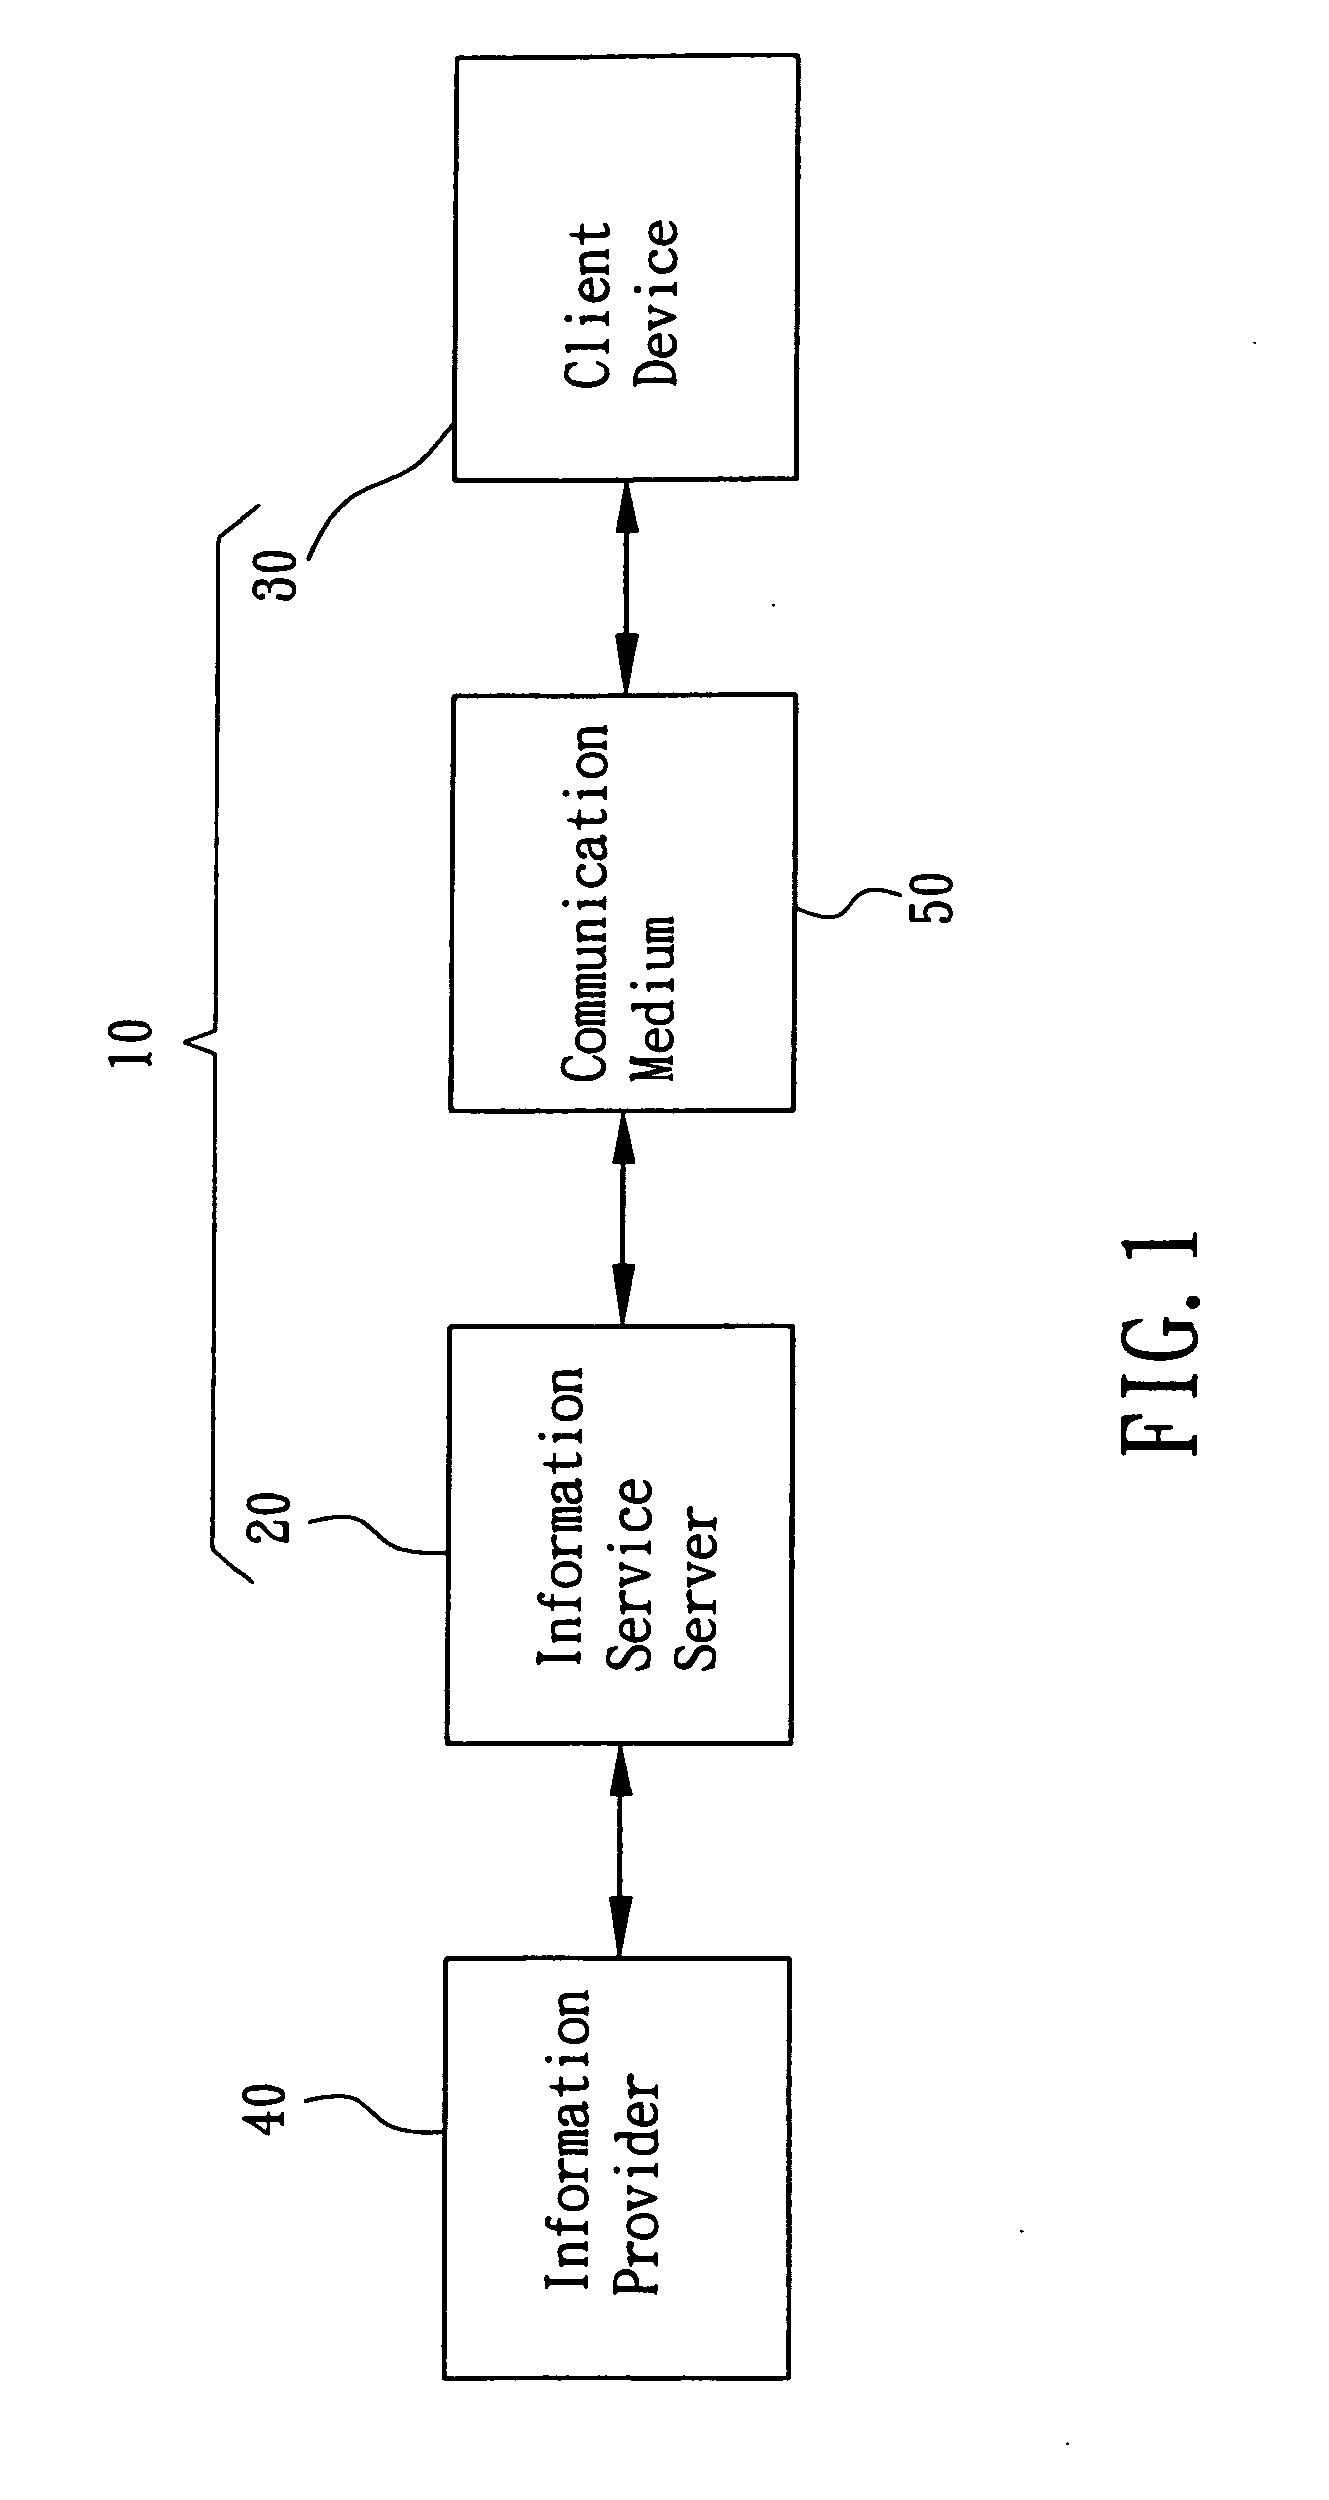 Distributed push-pull information service system